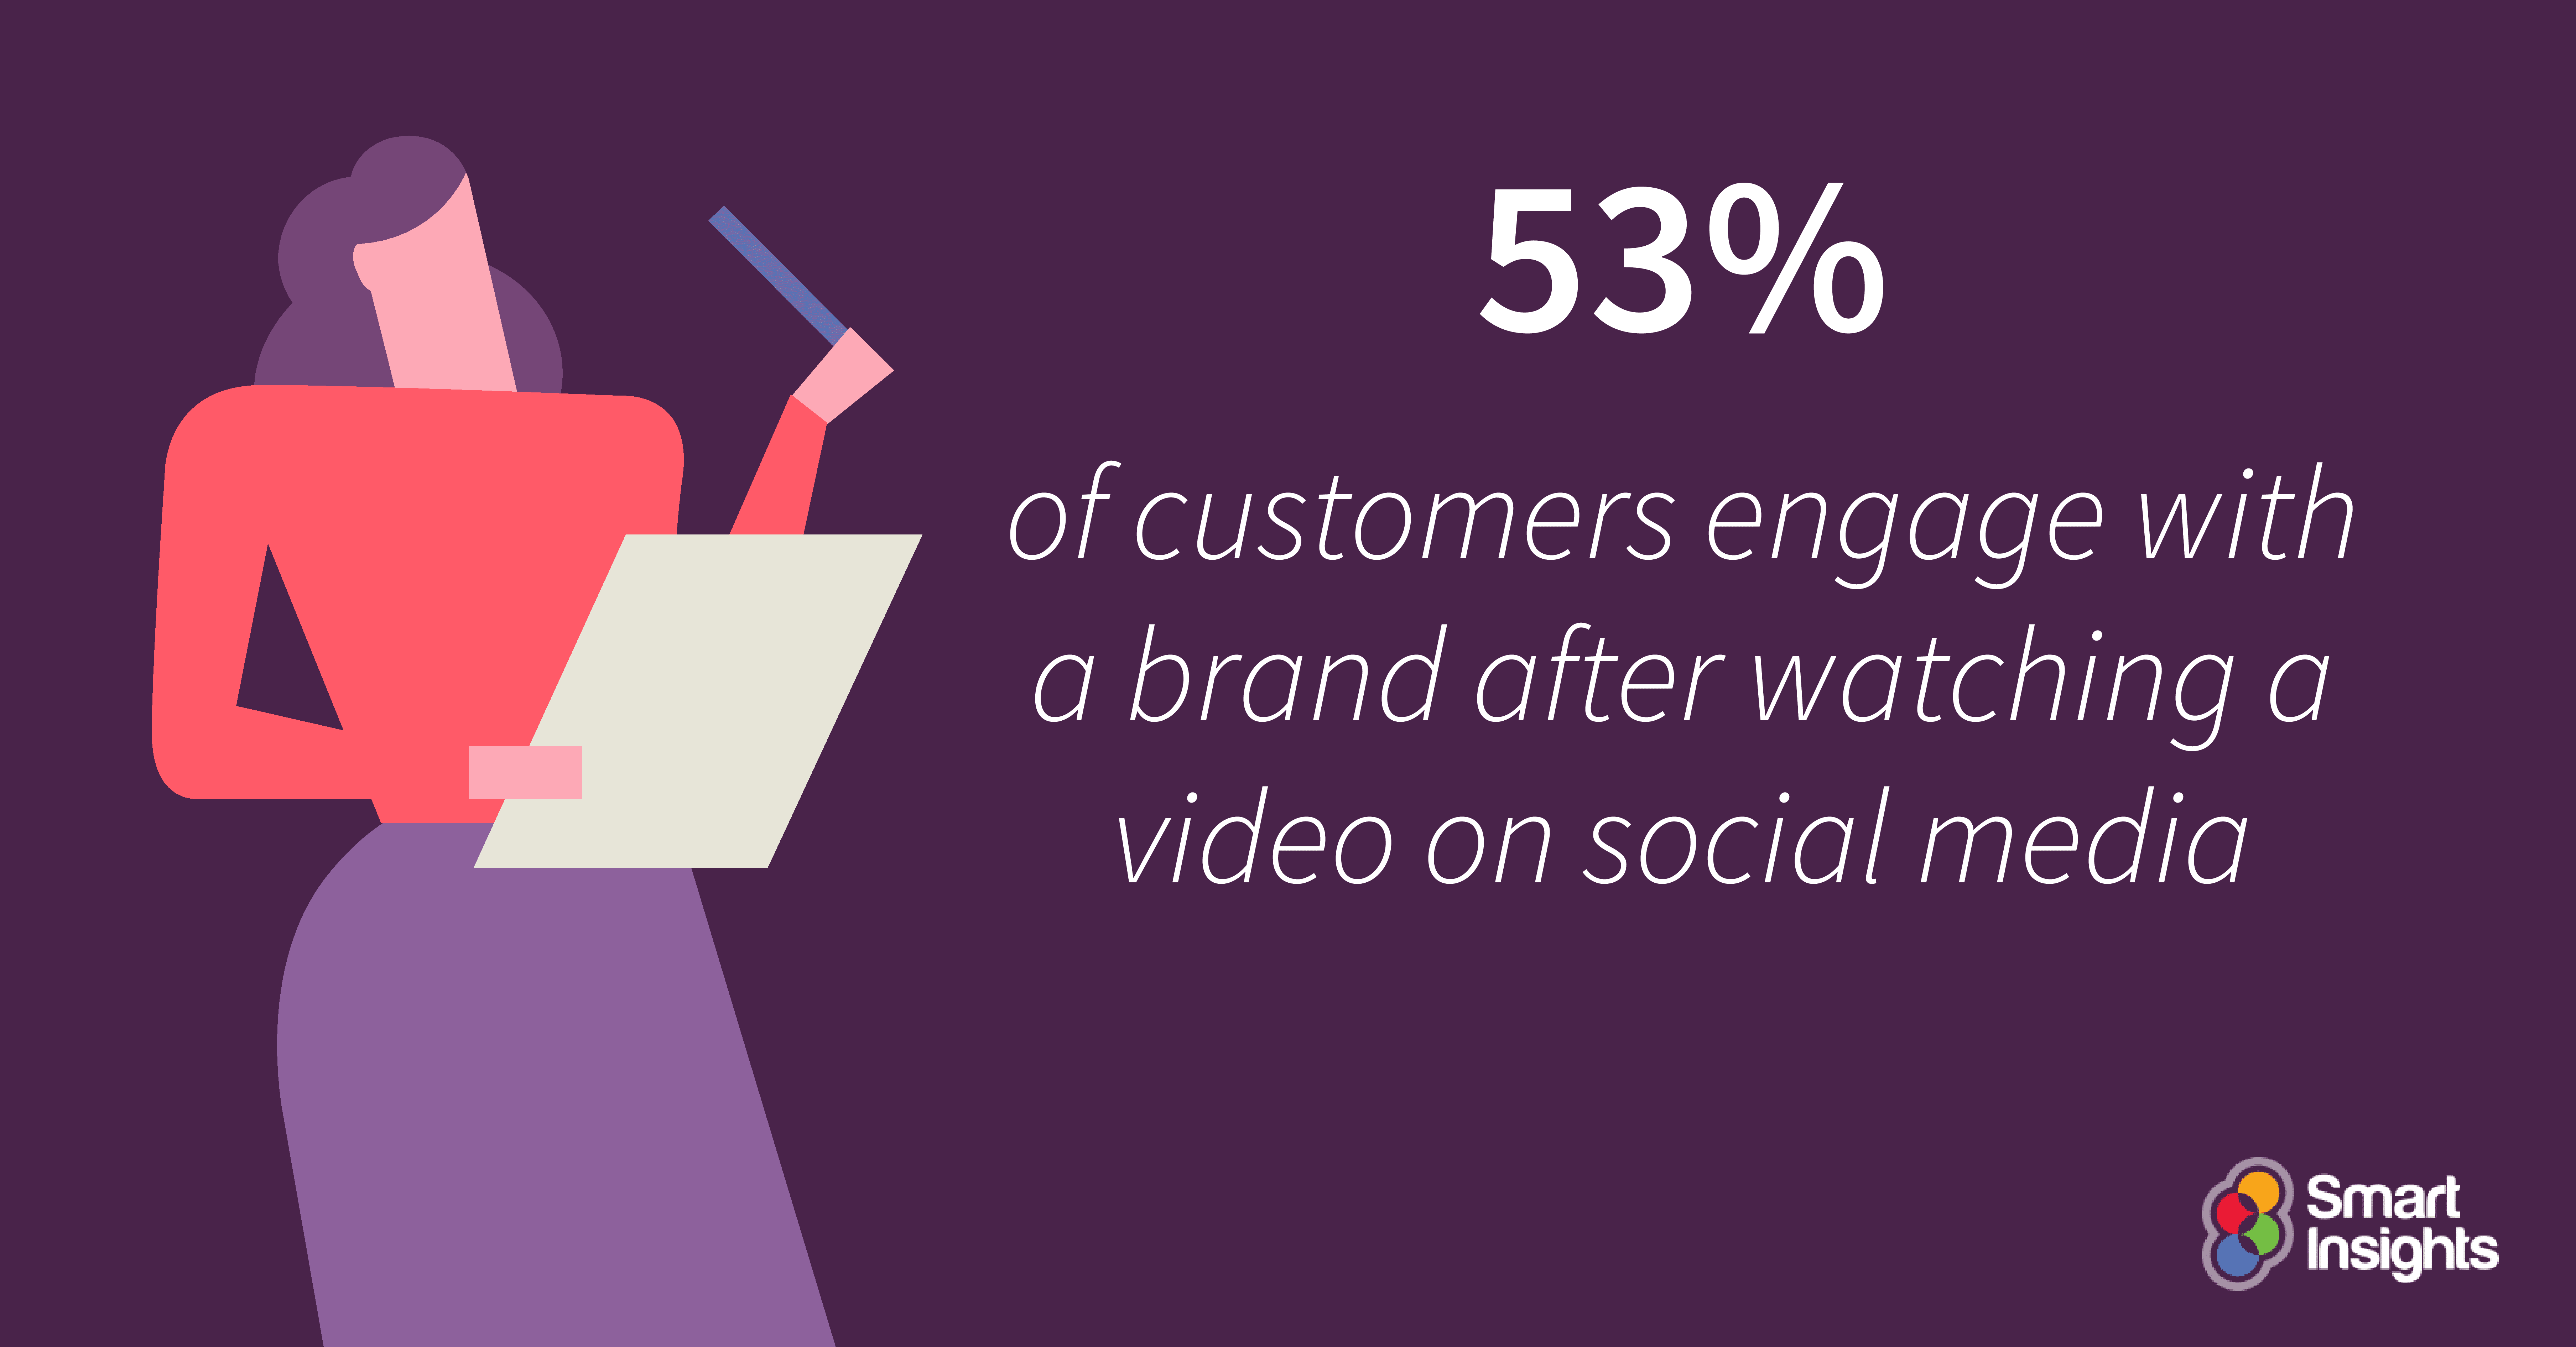 53% of customers engage witha. brand after watching a video on social media